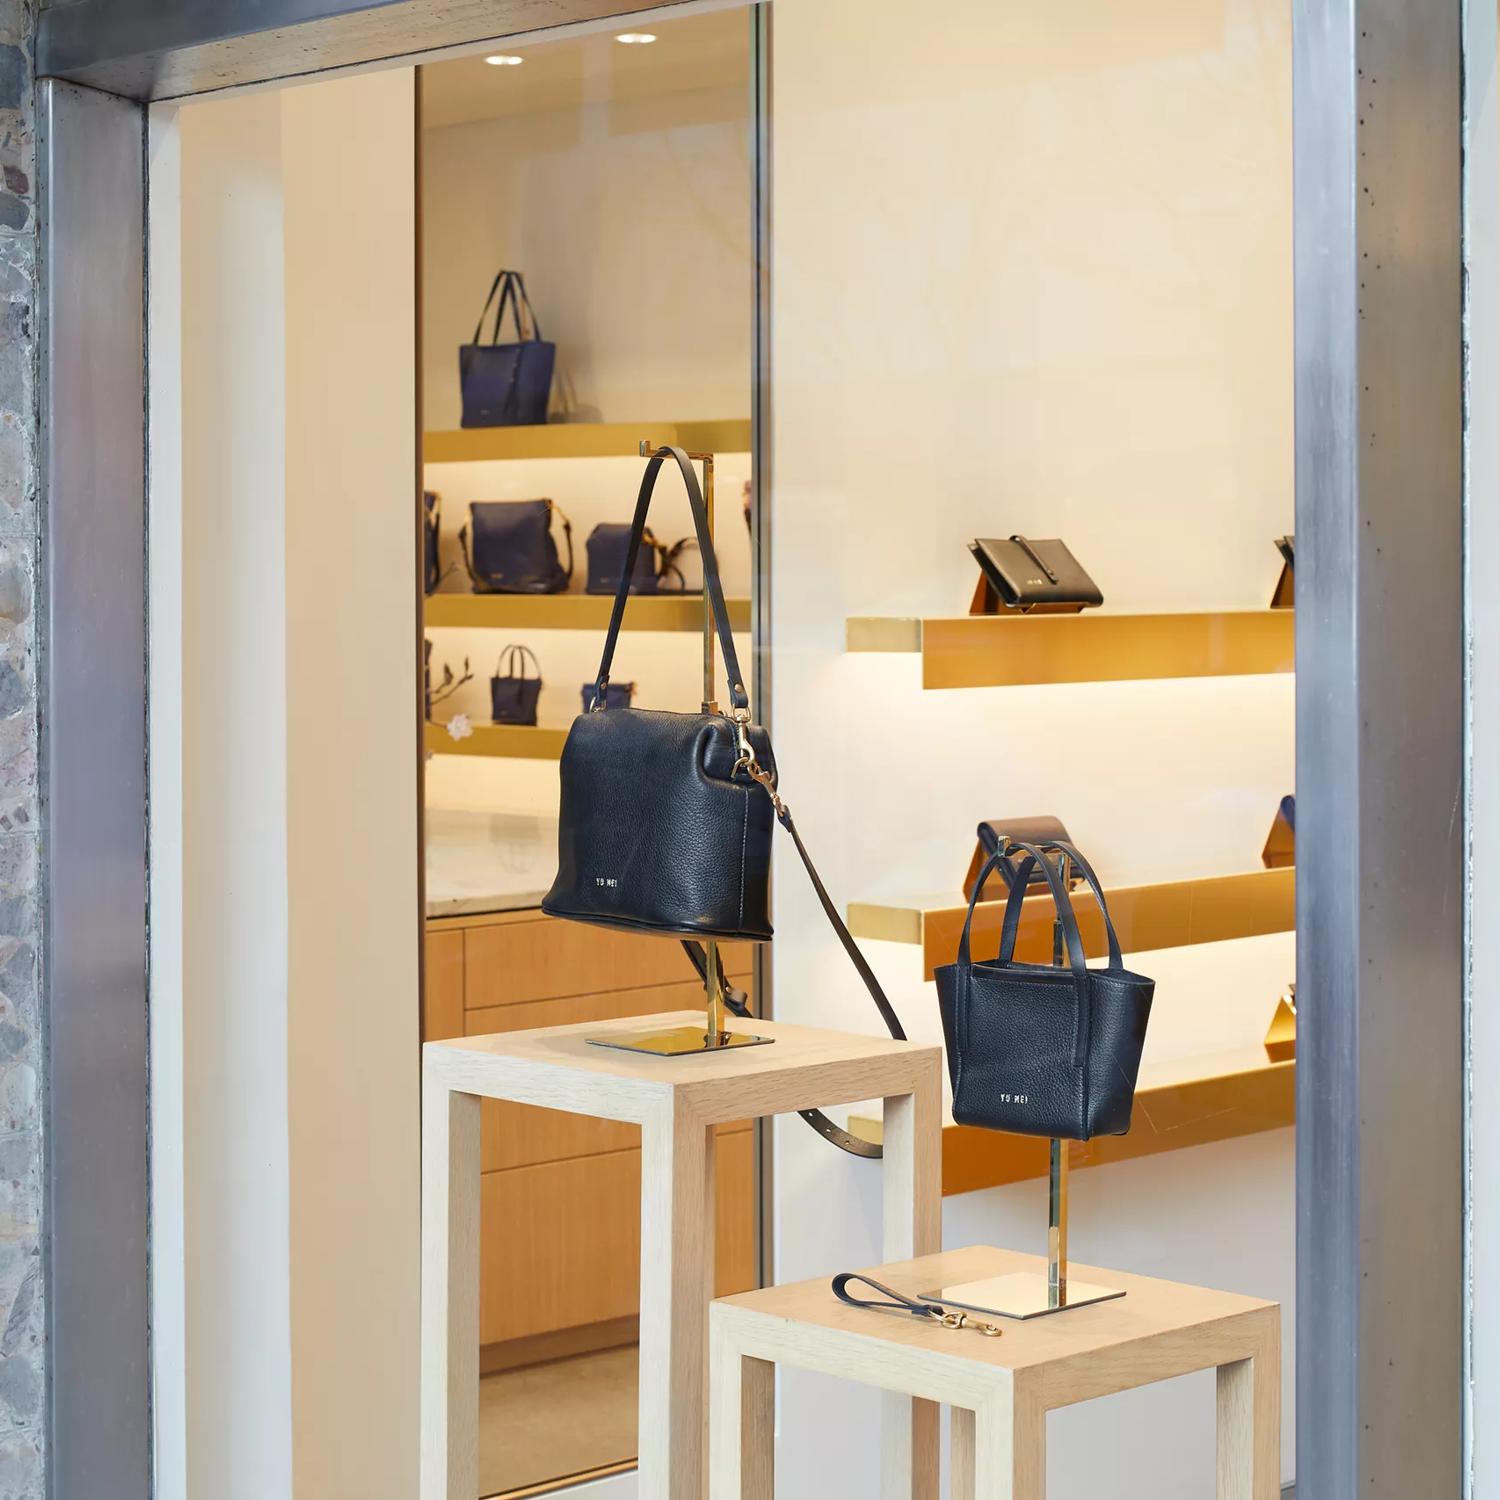 From the outside looking into Yu Mei handbag store. Yu Mei is in brass letters vertically against a terrazzo wall and two black handbags are displayed in the window.